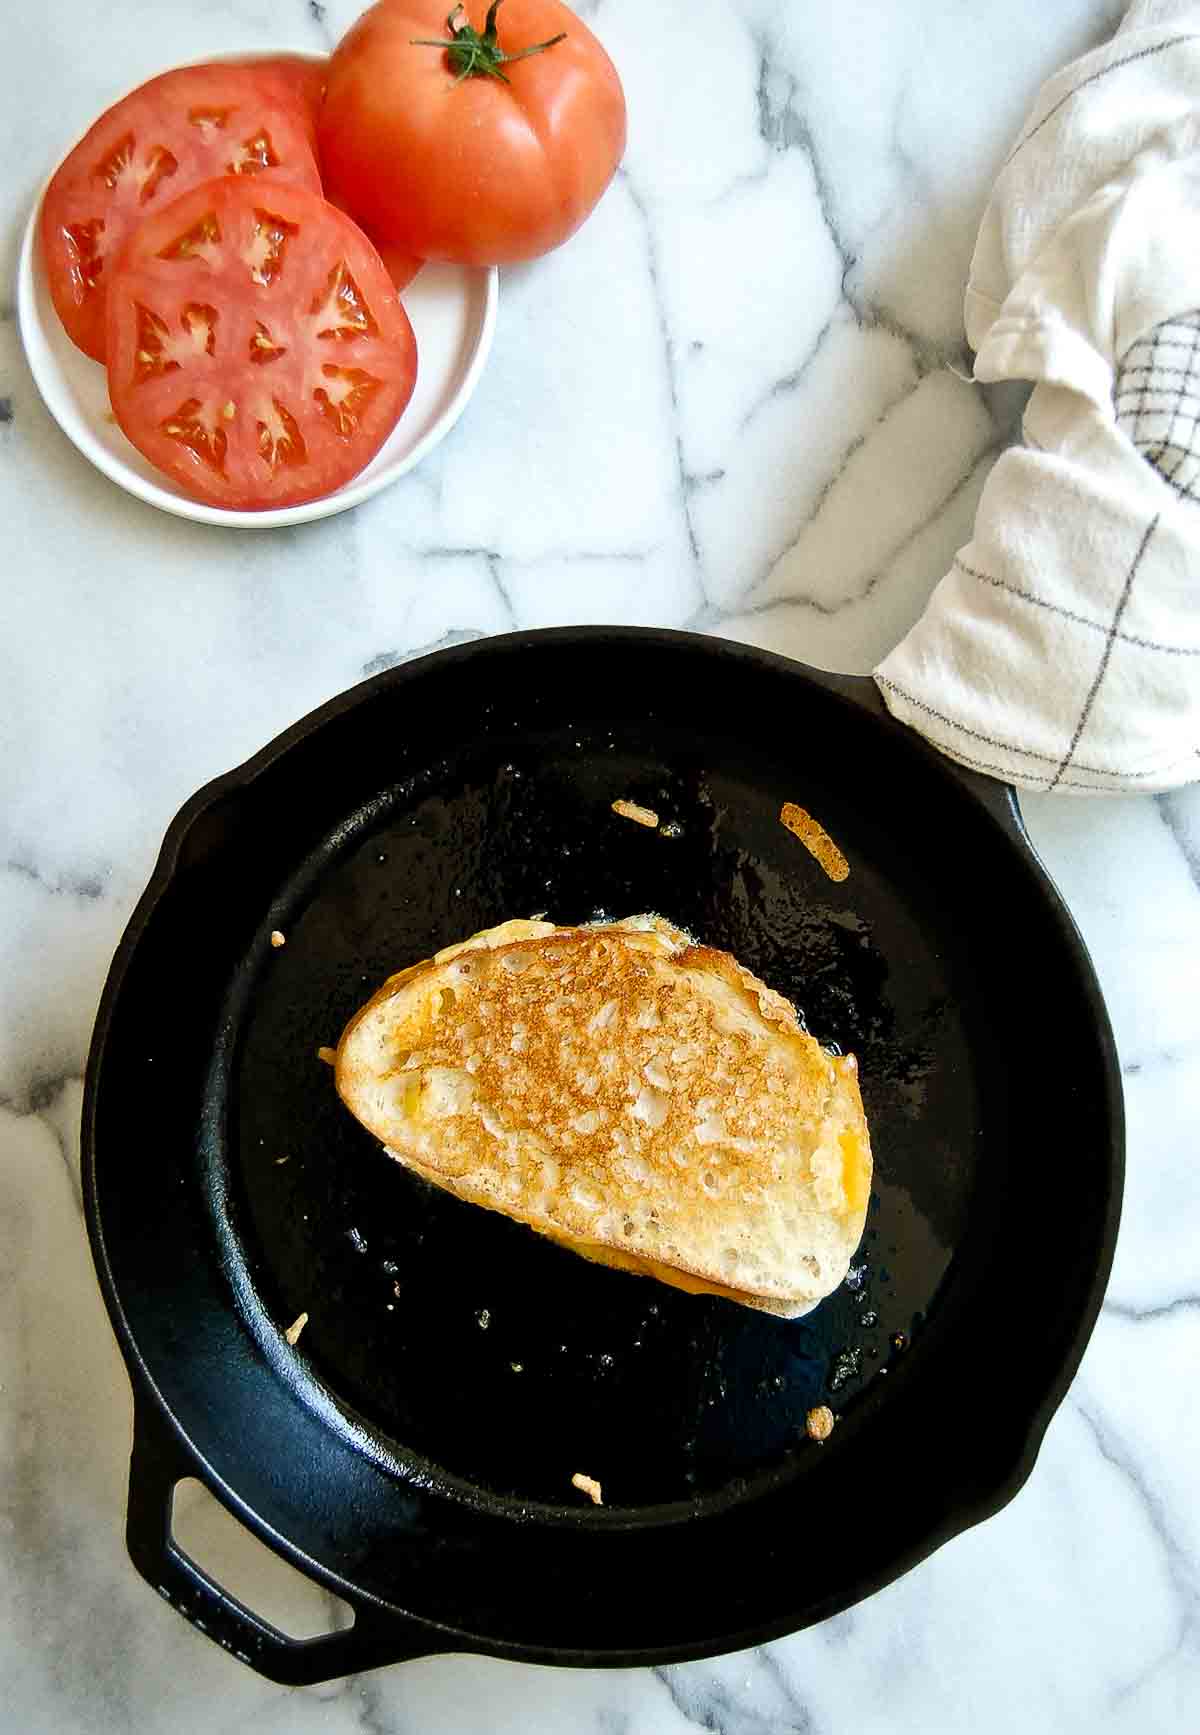 crispy sourdough grilled cheese in cast iron skillet with plate of tomatoes to the side.